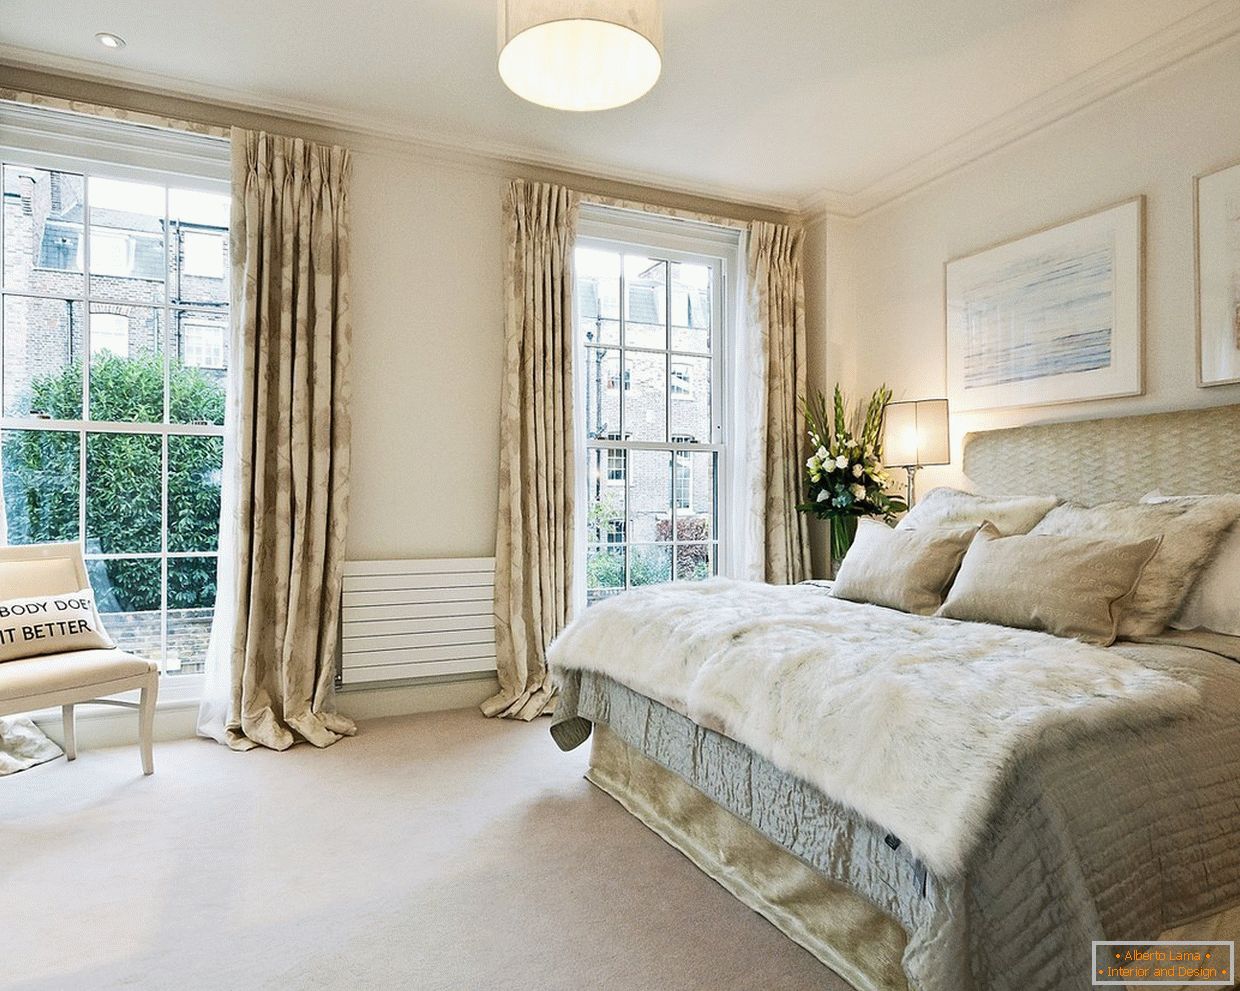 Bedroom design in a private house